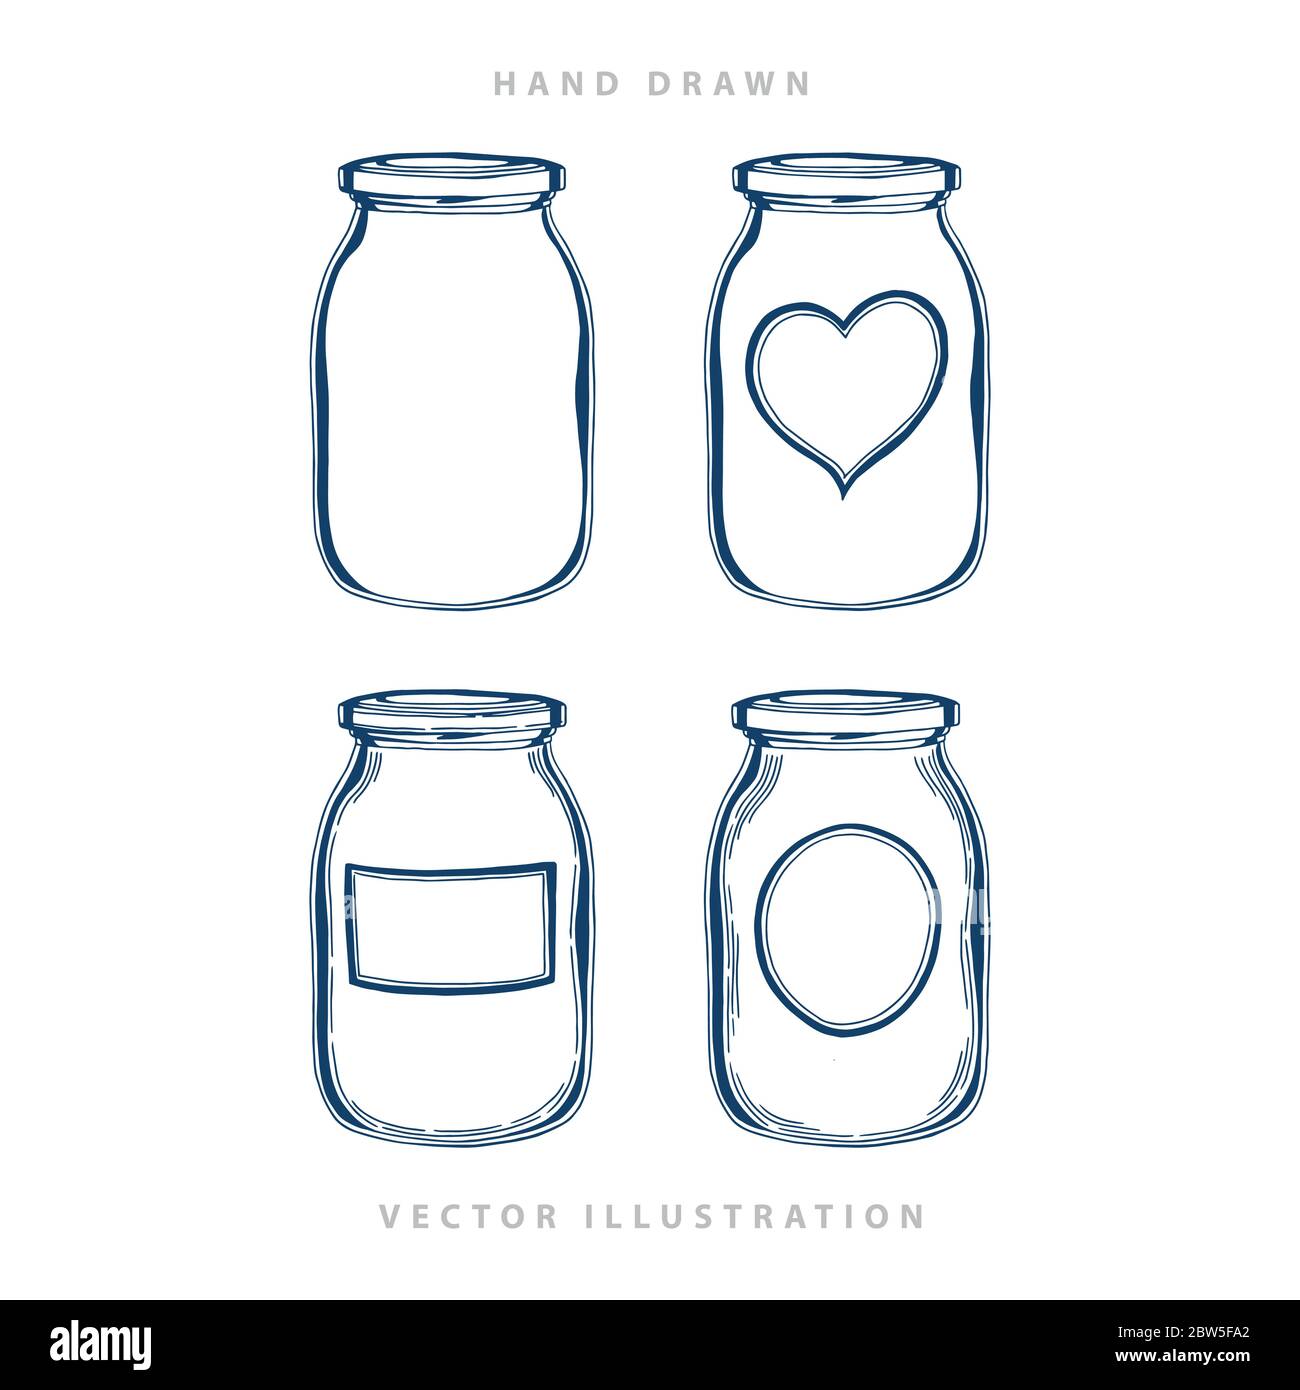 Jar. Hand drawn different jars with labels. Glass jar sketch drawing set. Stock Vector